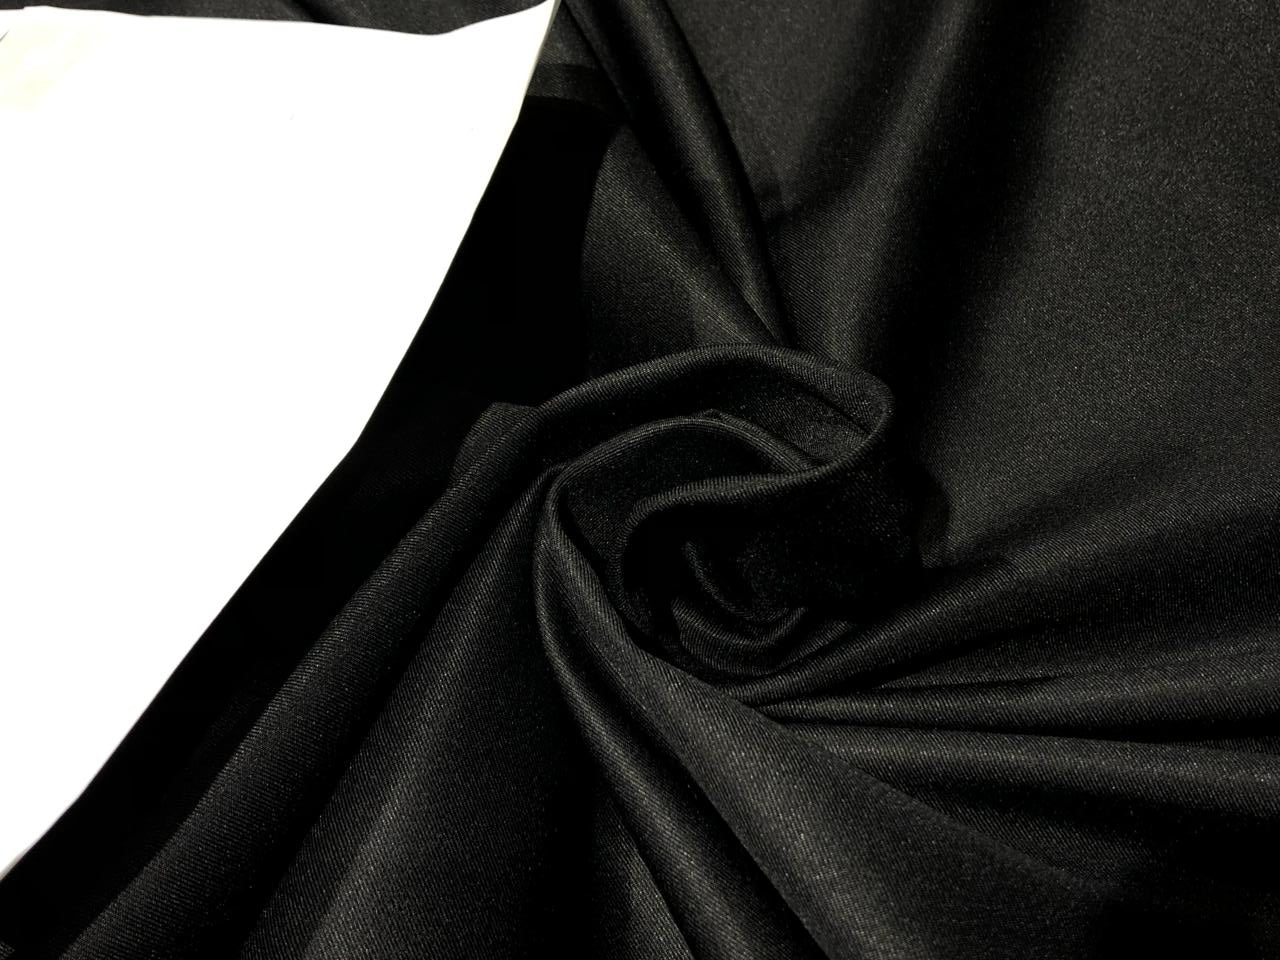 COTTON FEEL FABRIC 7 HORSES 58" wide available in 2 colors black and white